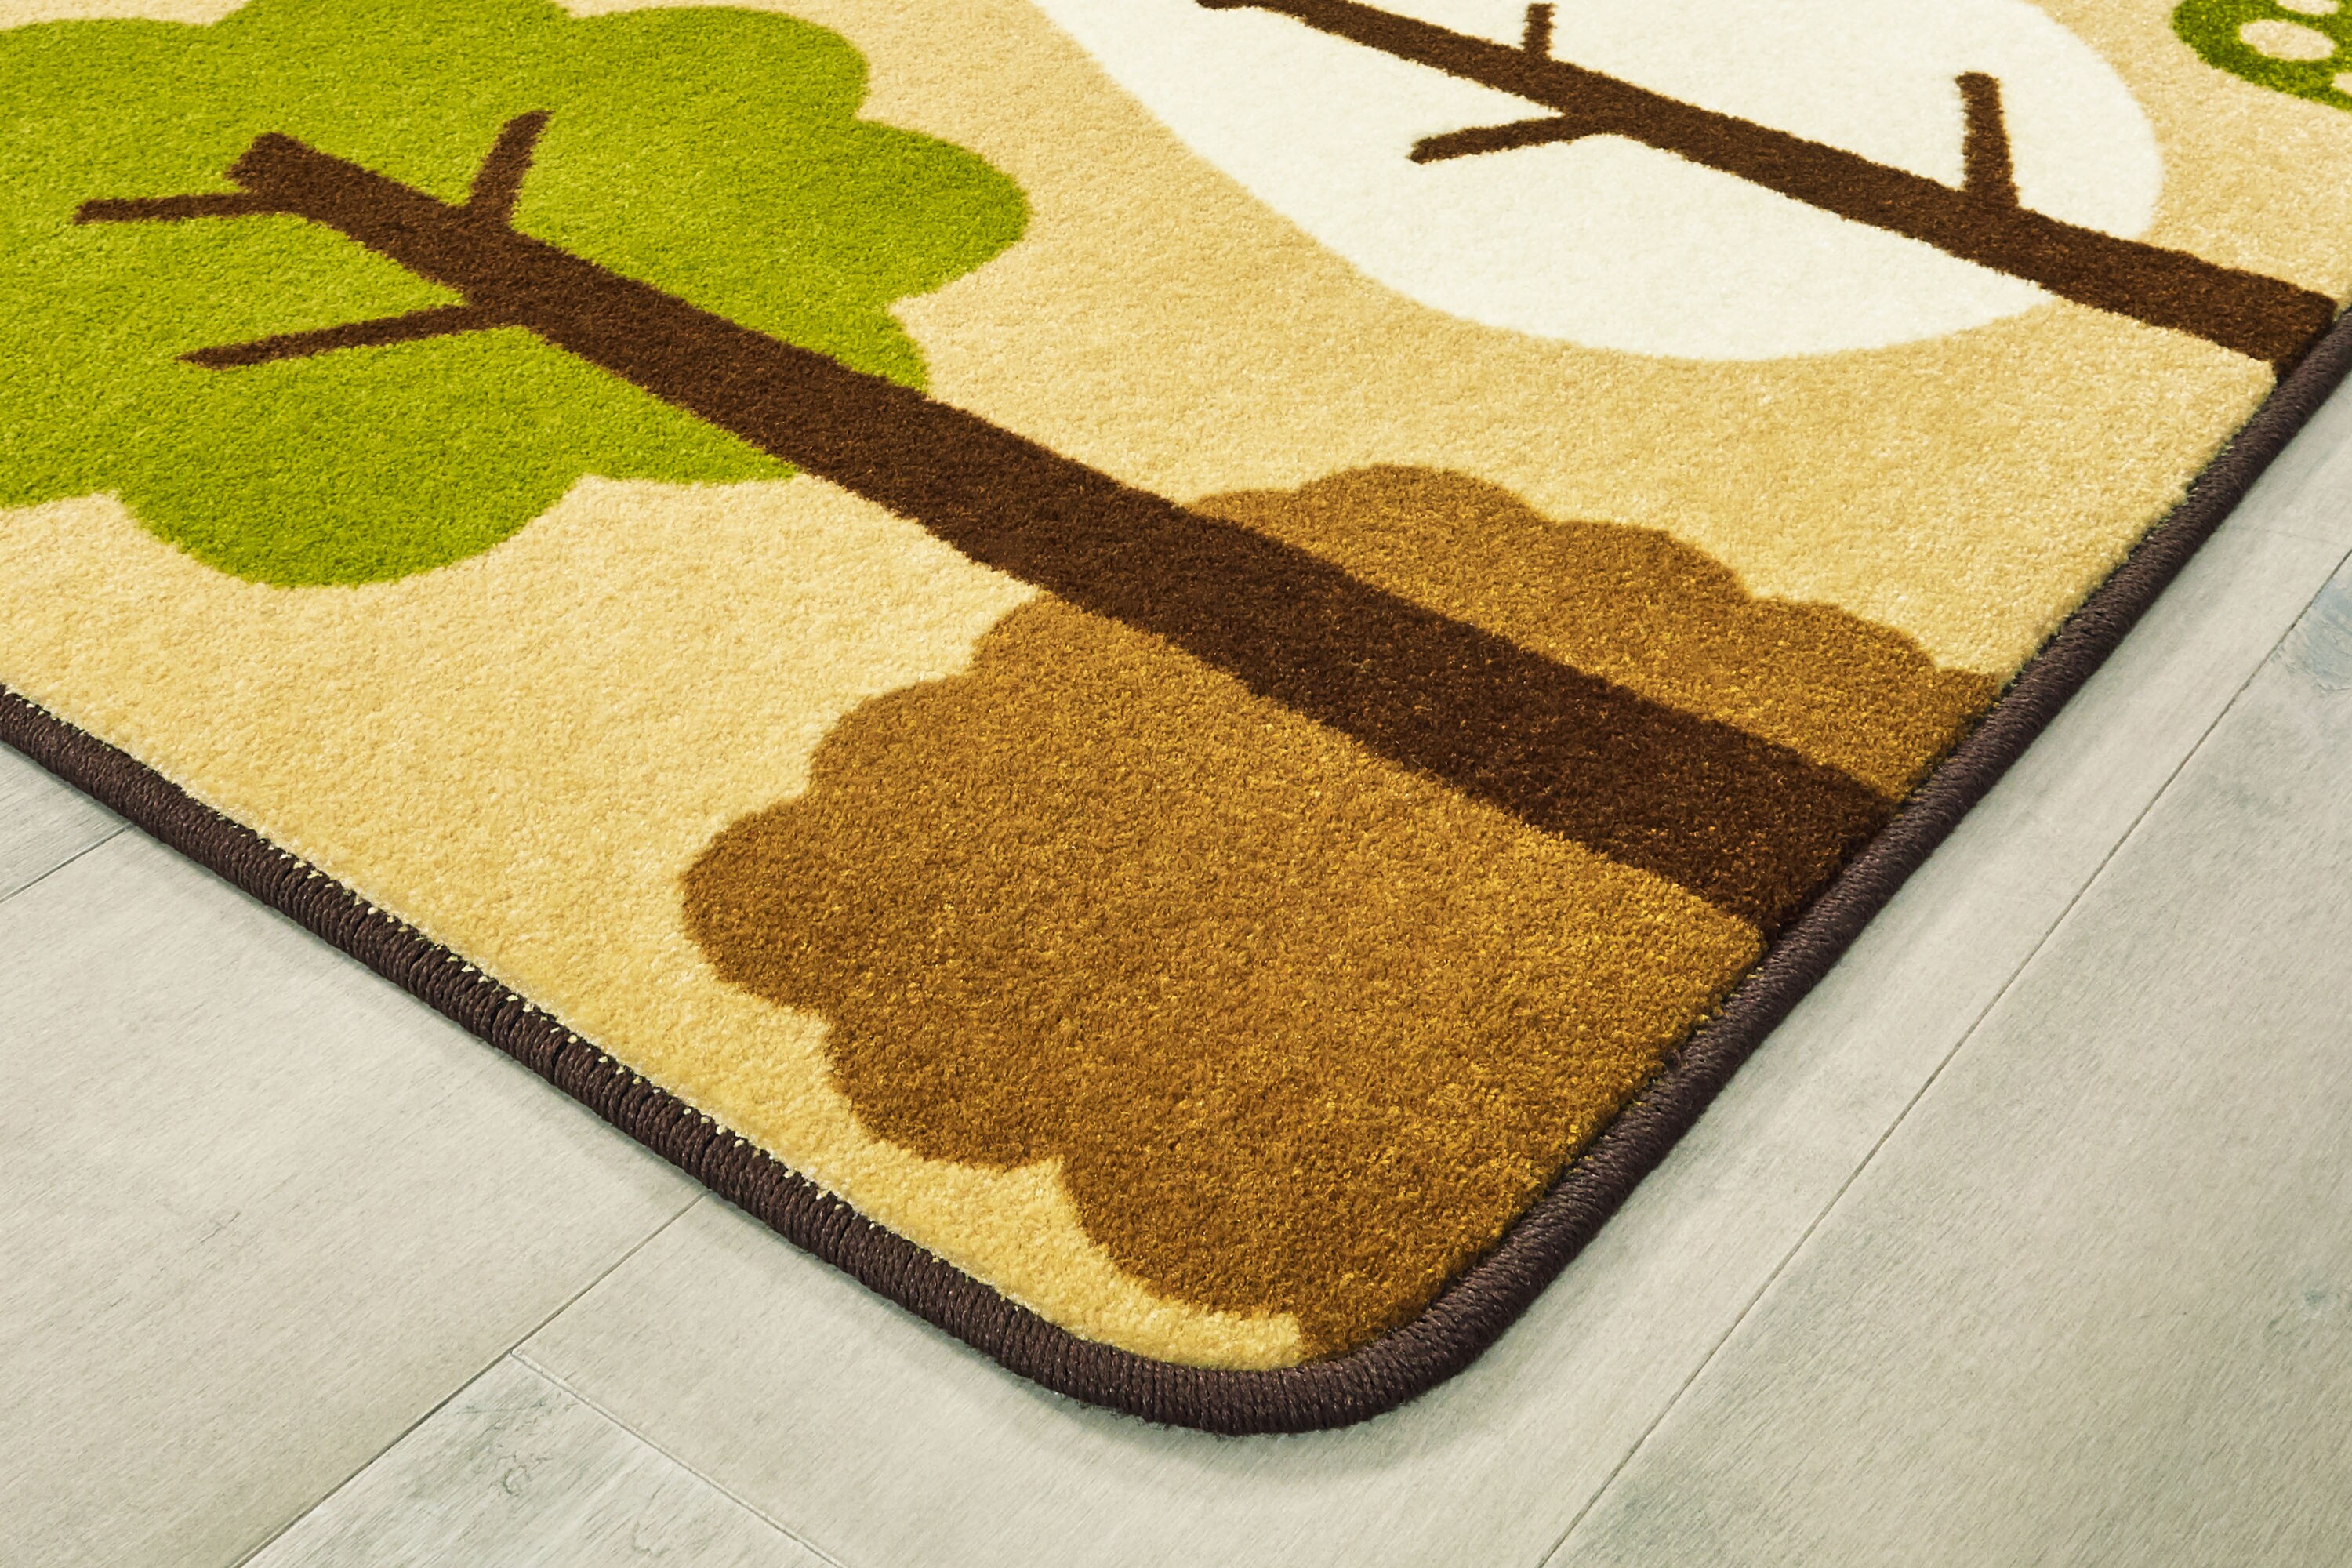 Carpets for Kids Area rug Home Decor at